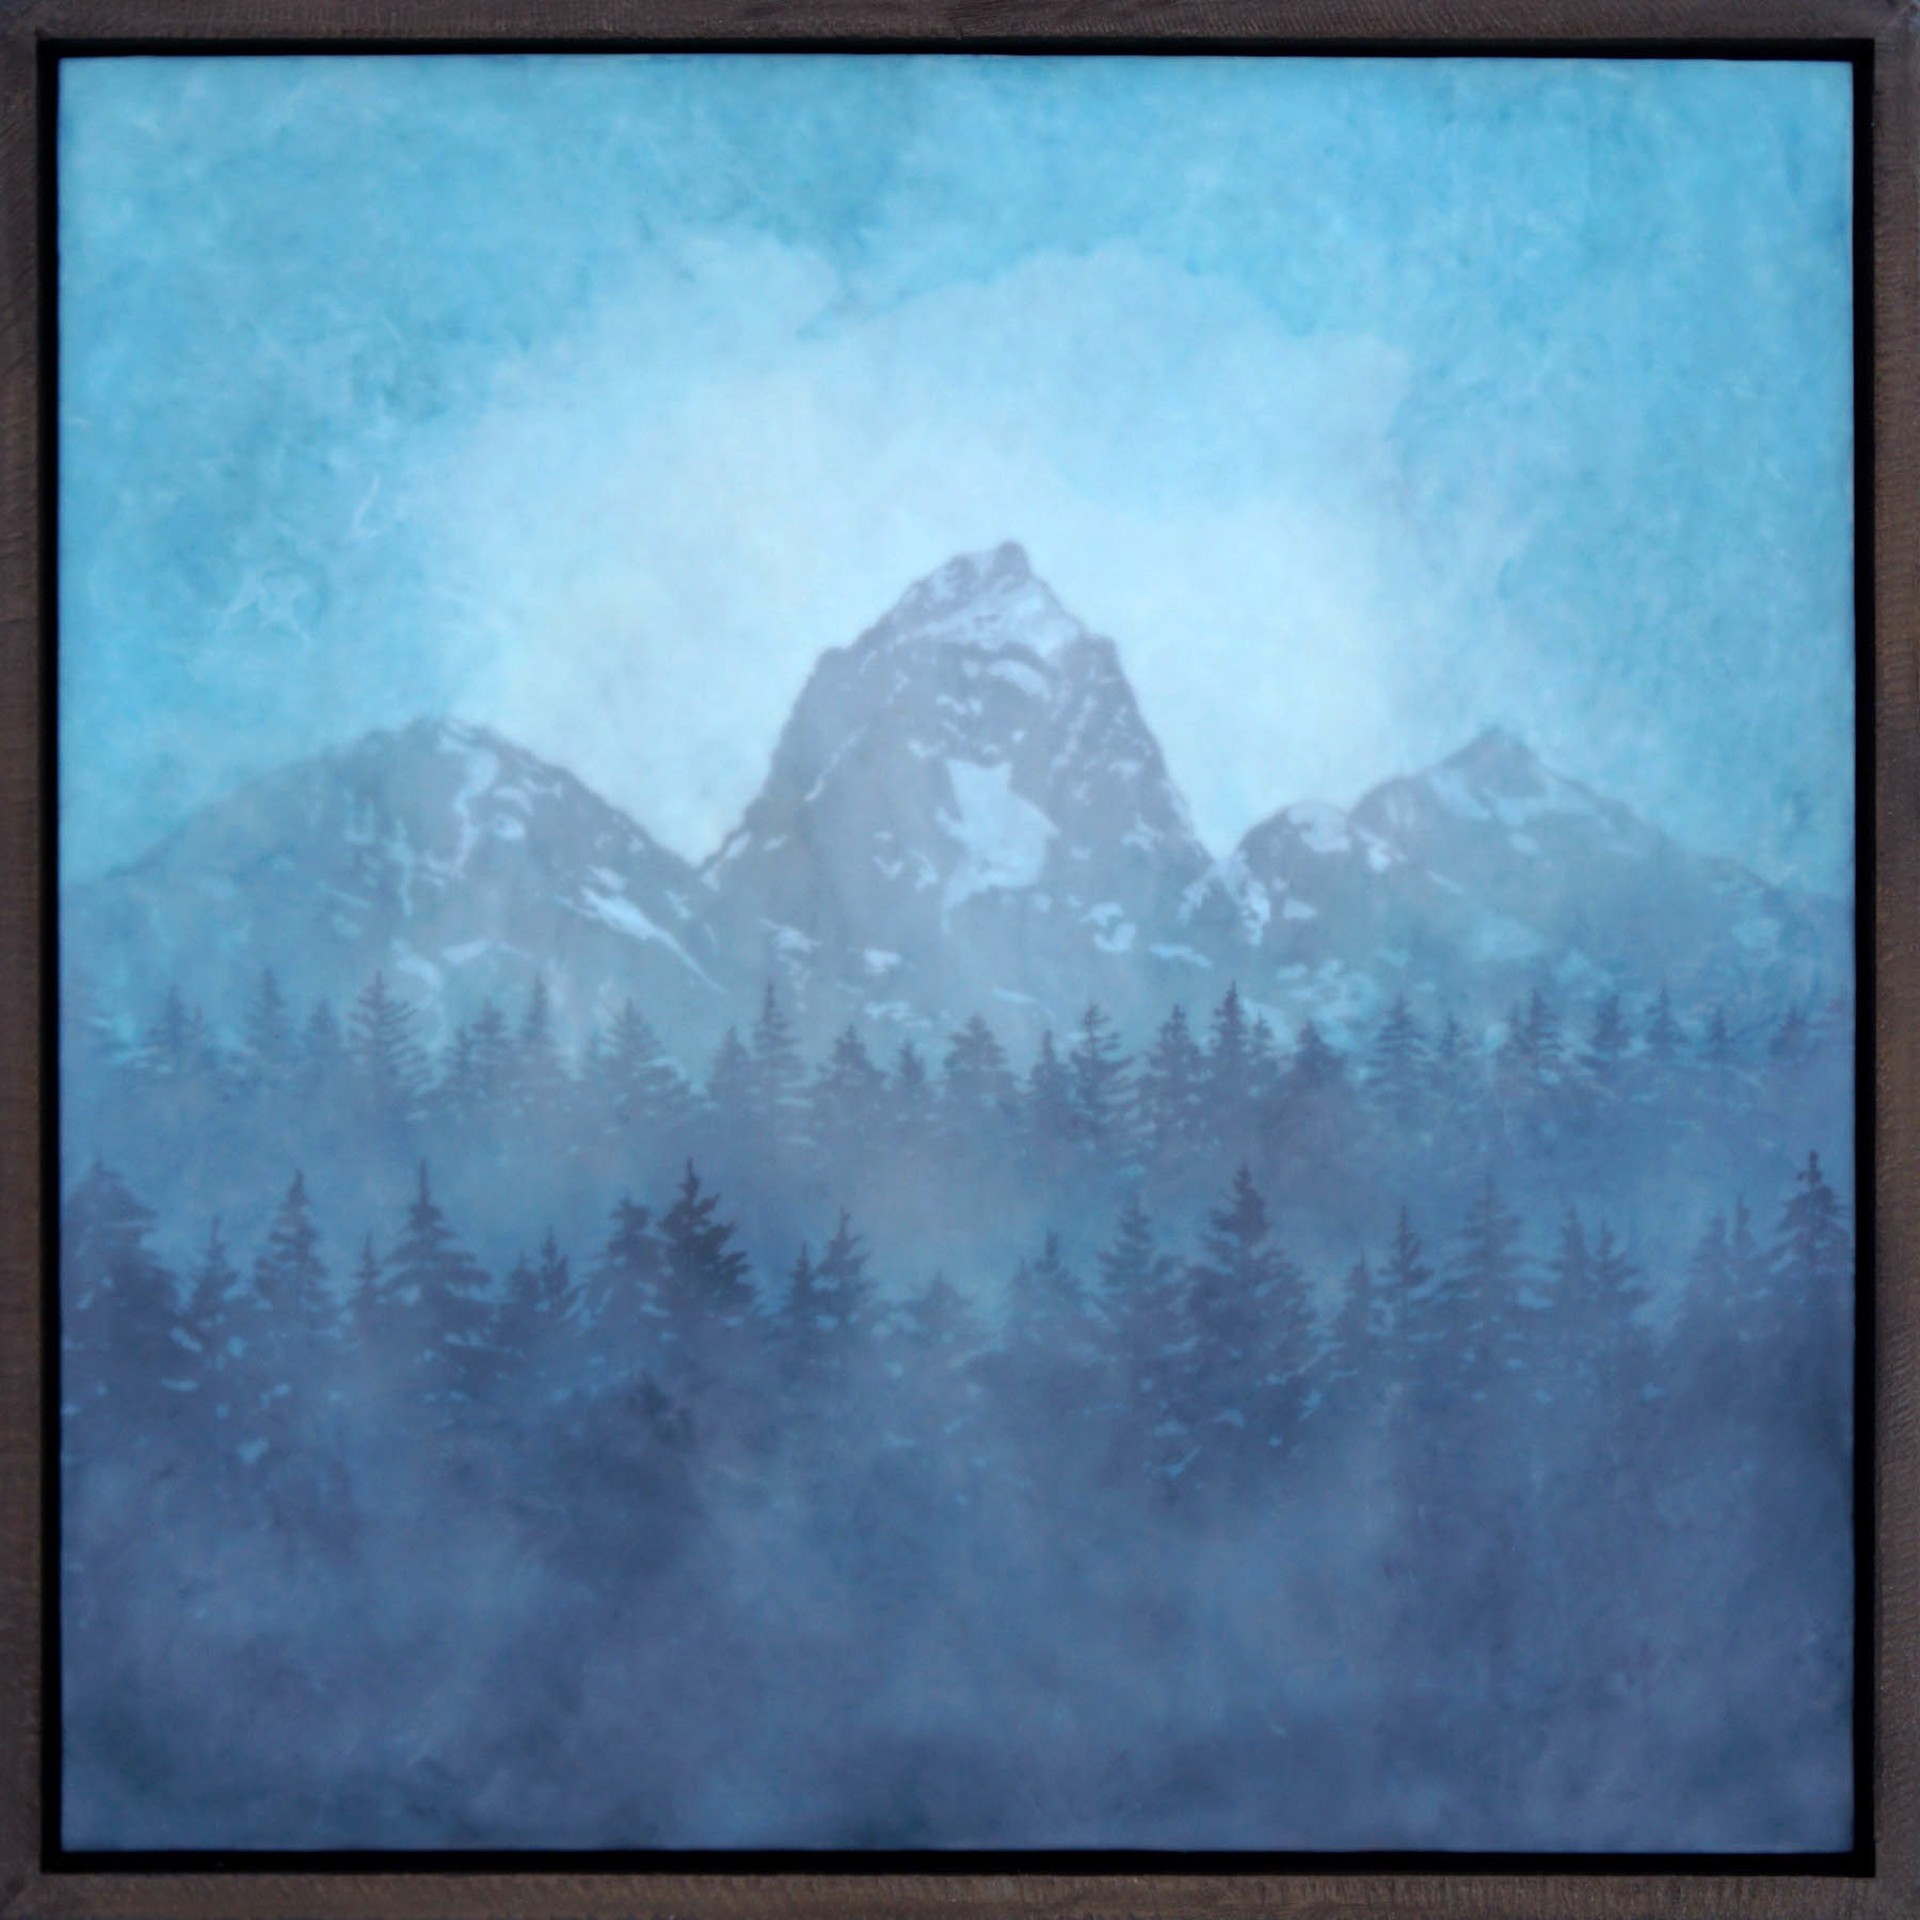 Original Encaustic Landscape Painting Featuring Mountain Peak And Pine Trees through Hazy Blue Tinted Clouds